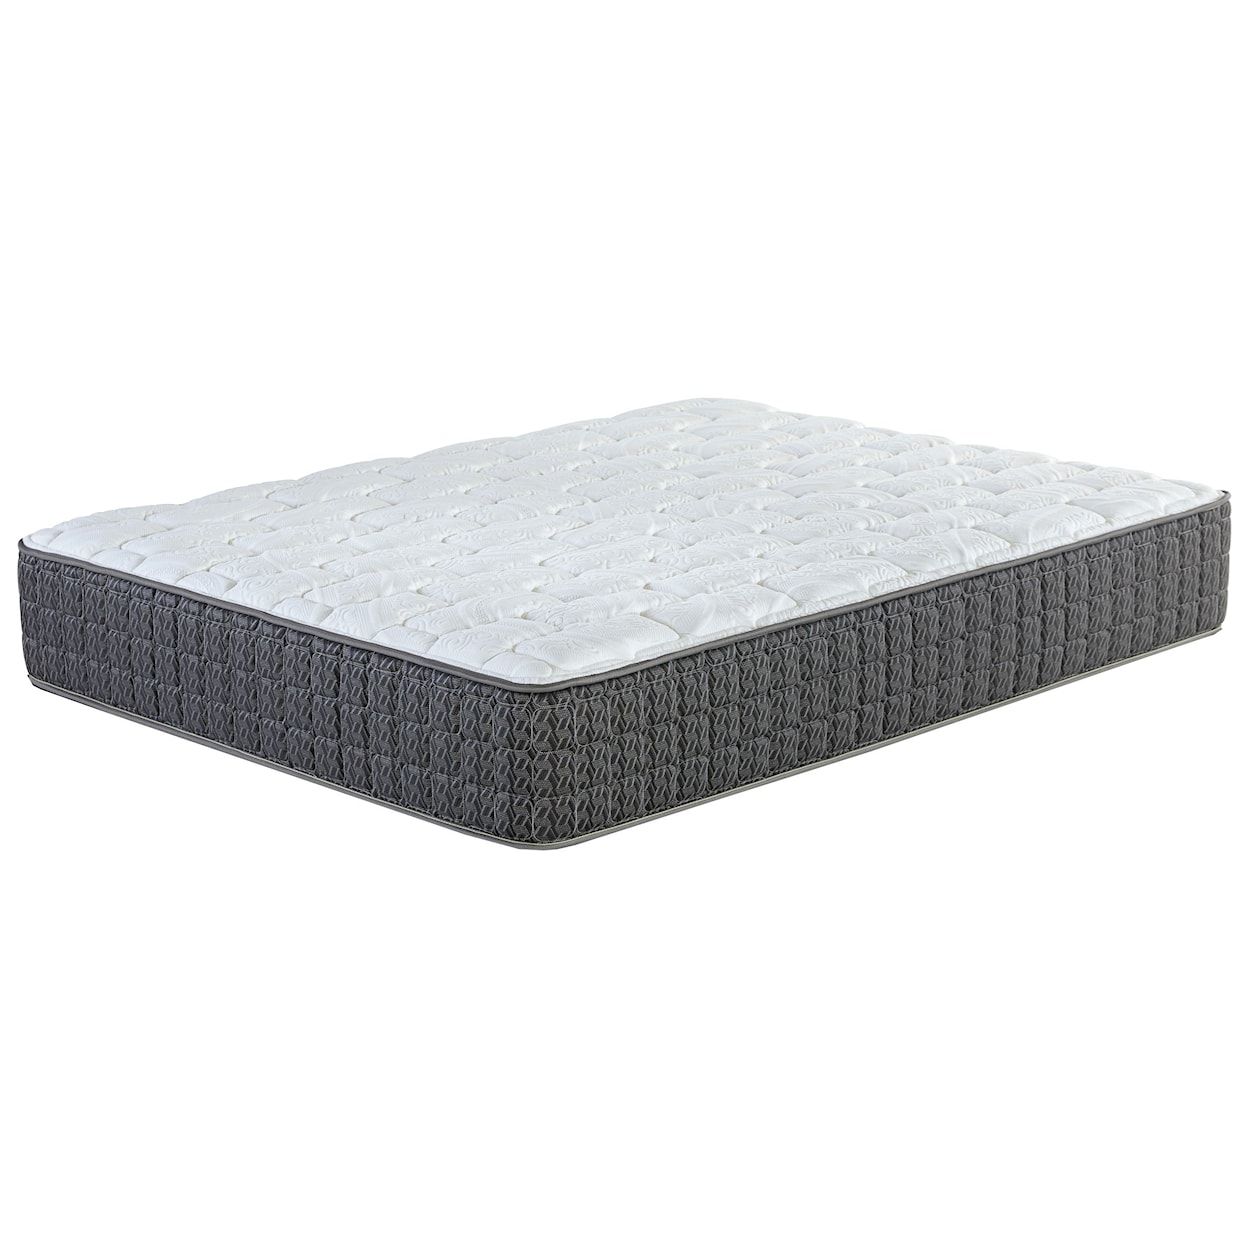 Corsicana Kinley Firm Full Firm Pocketed Coil Mattress